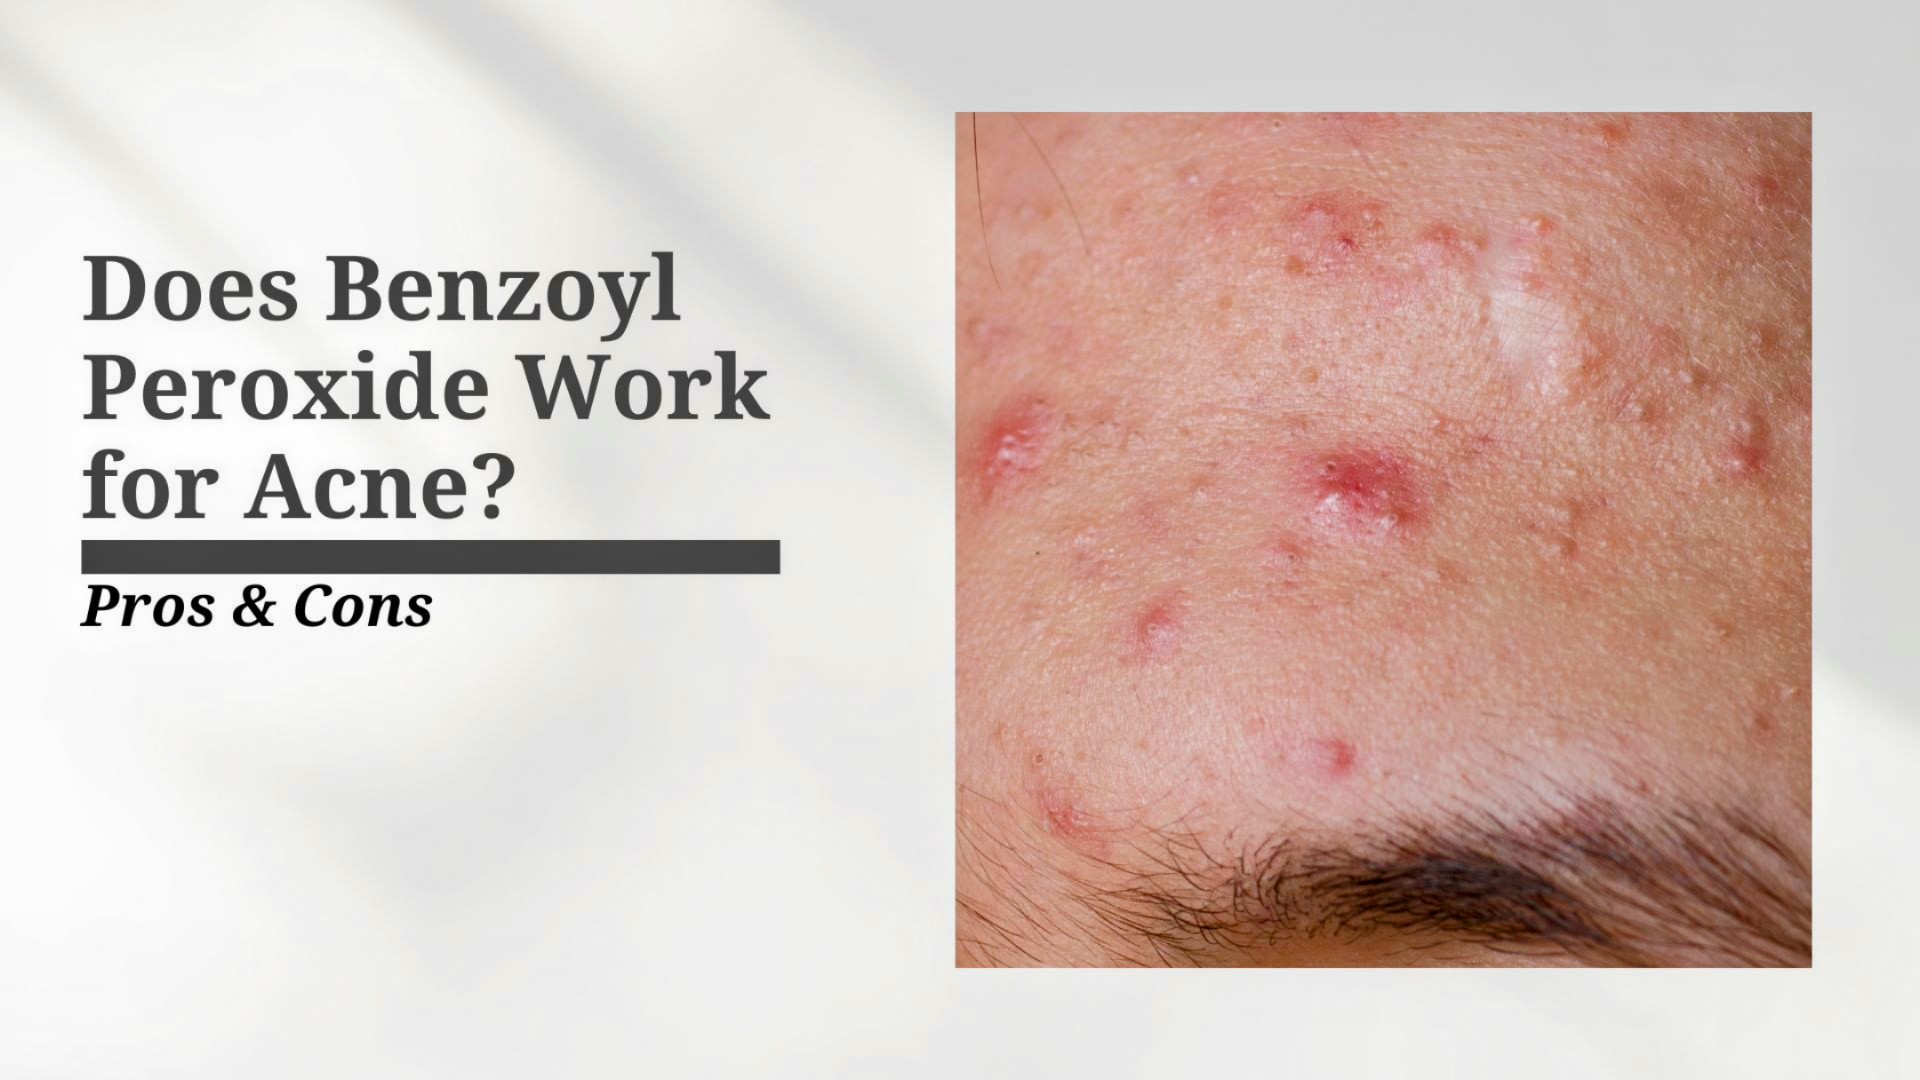 Does Benzoyl Peroxide Work for Acne